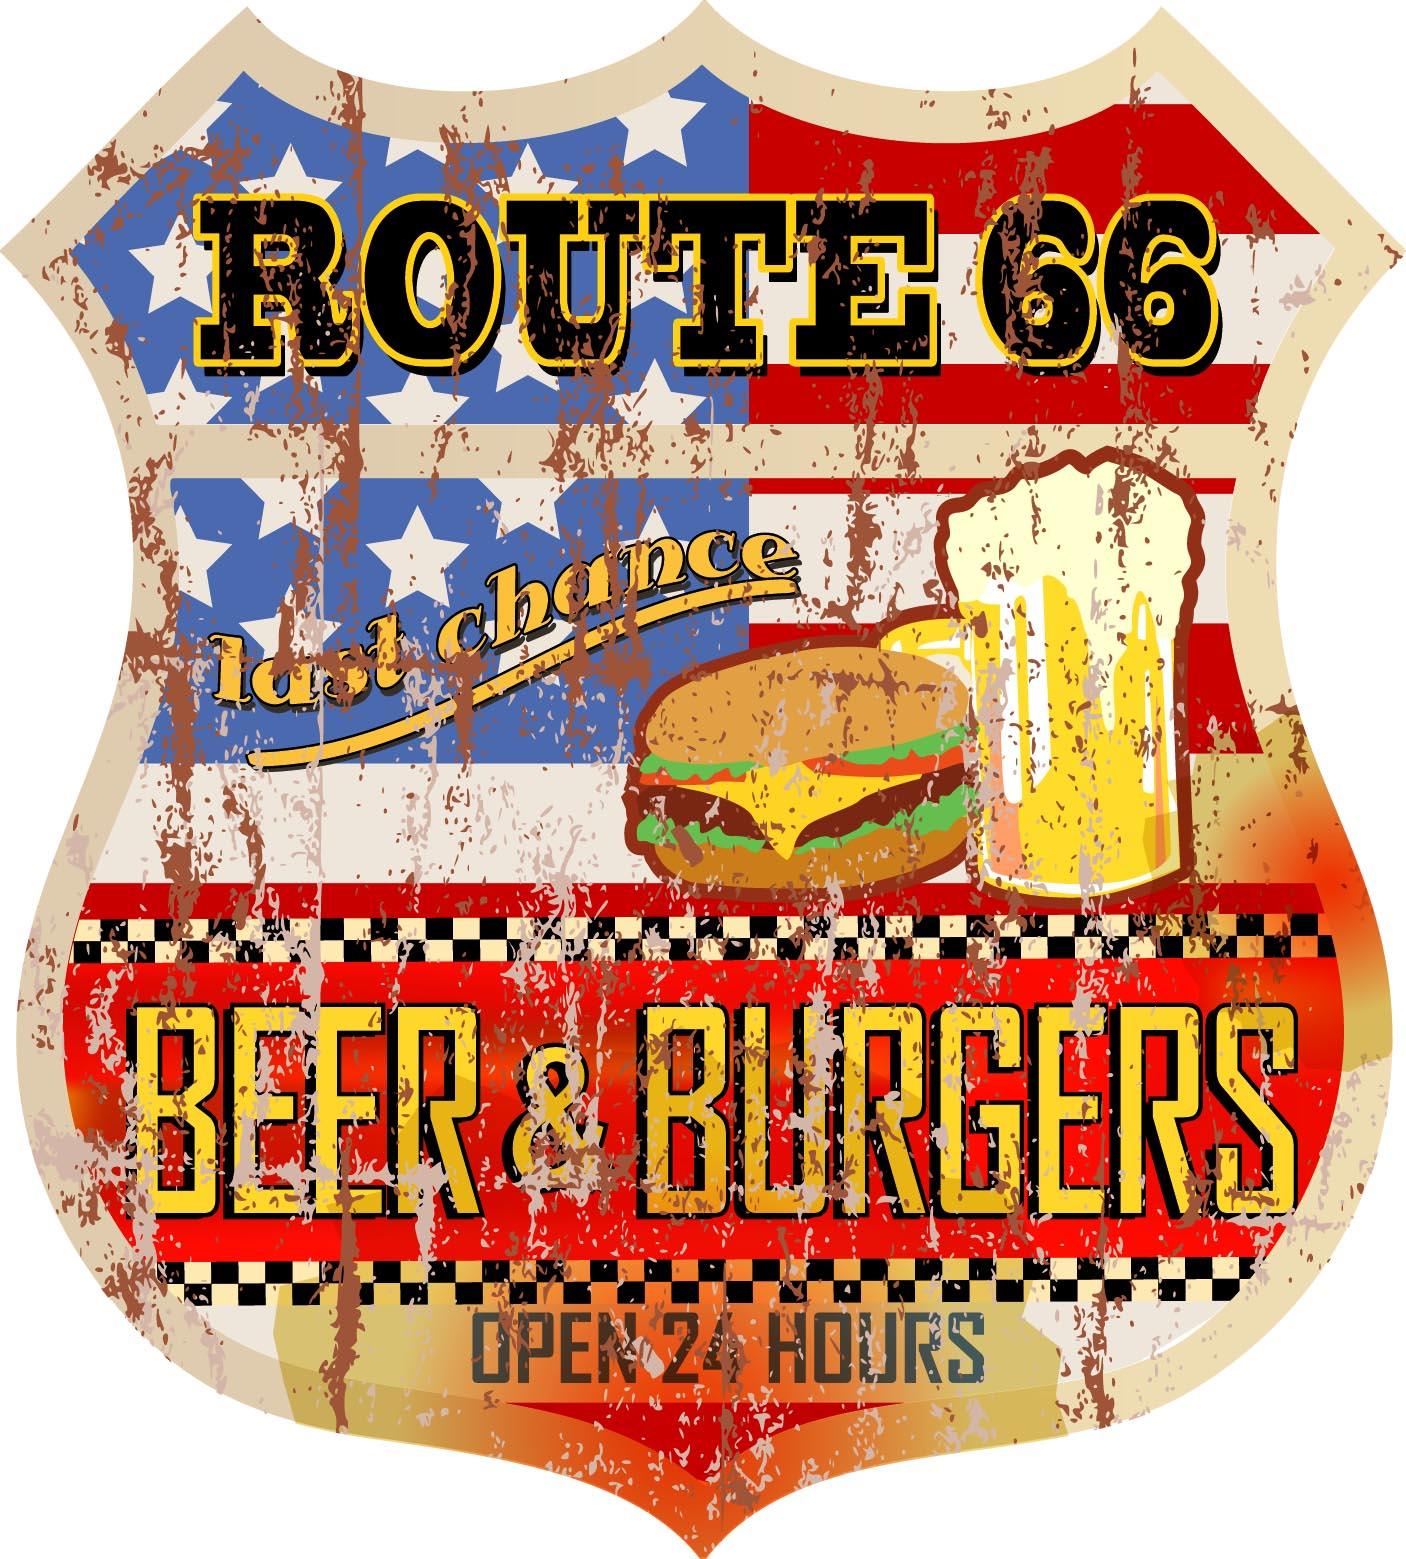 Route 66 Beer and Burgers: Wall Sticker, Man Cave